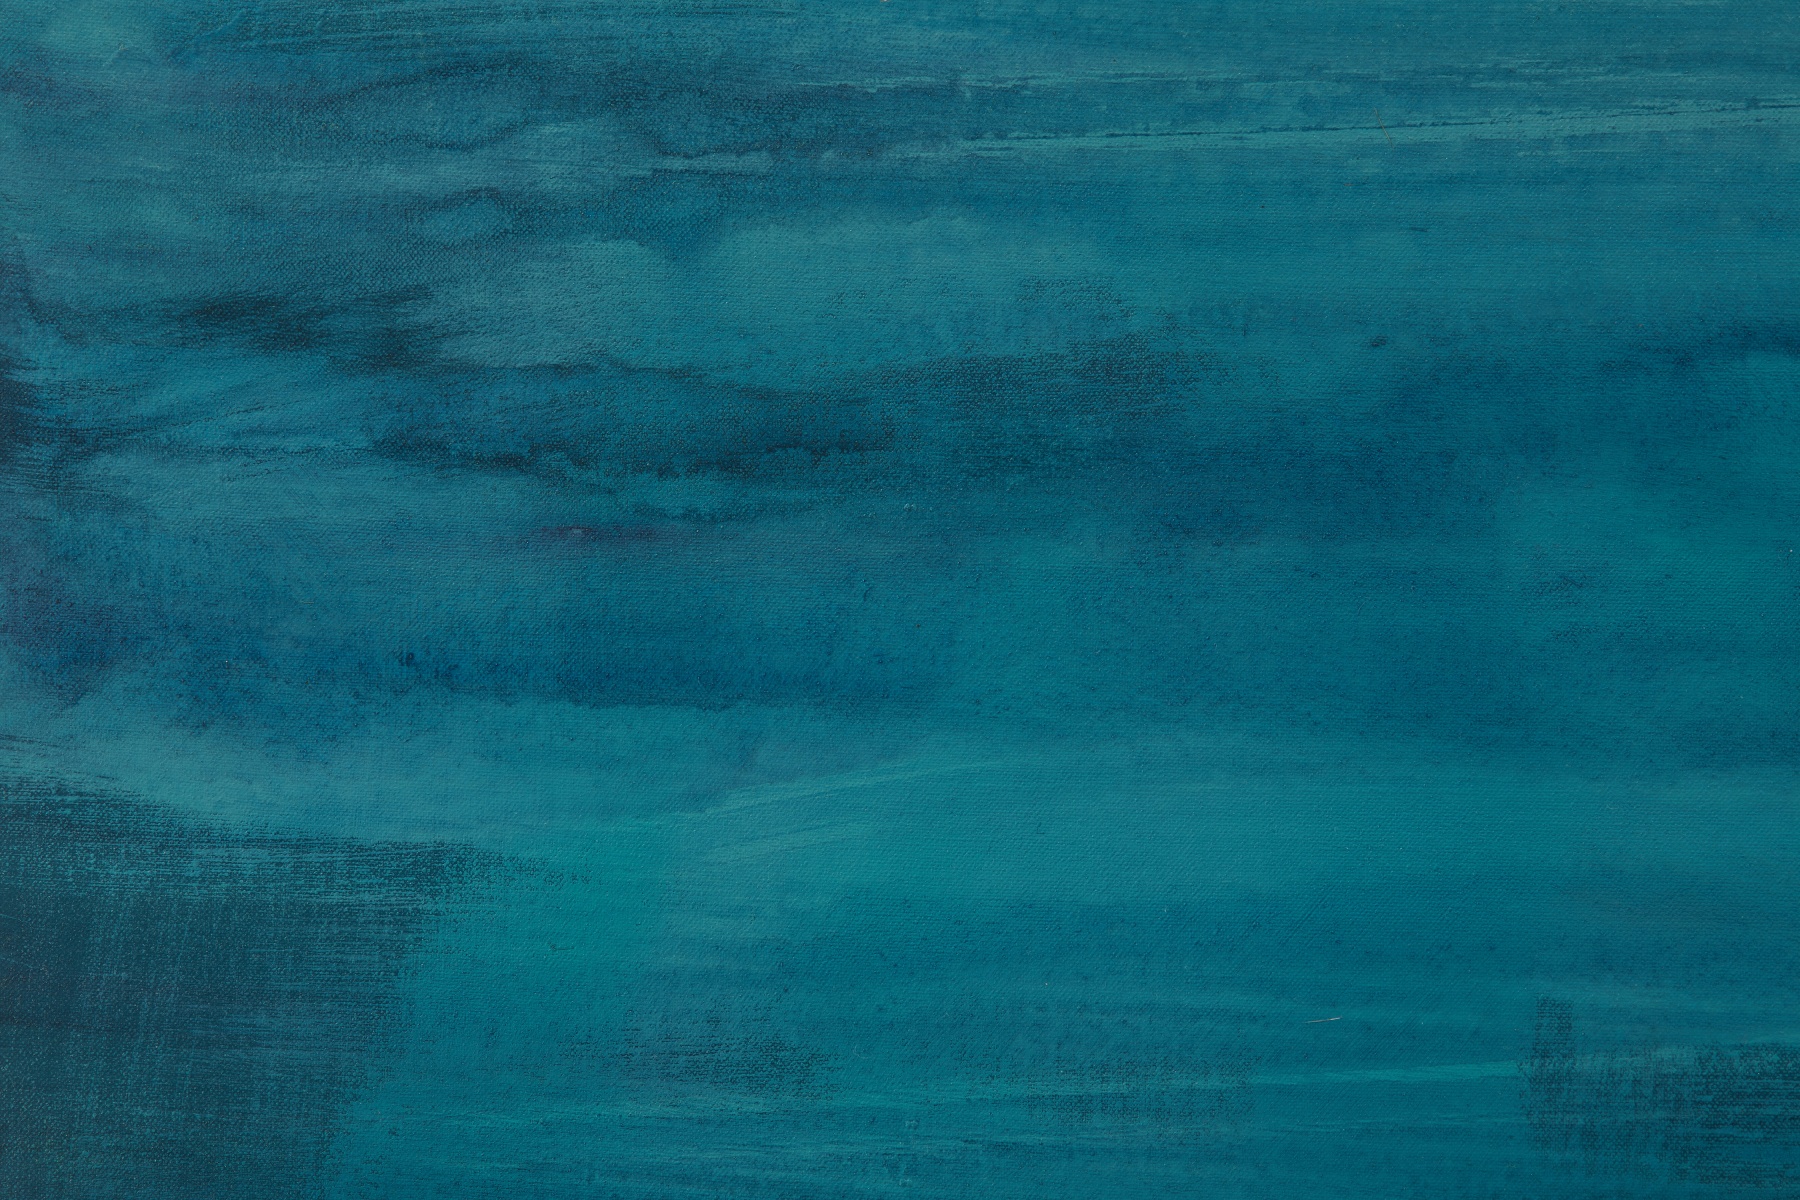 An abstract depiction of sea in turquoise and brushstrokes with different densities